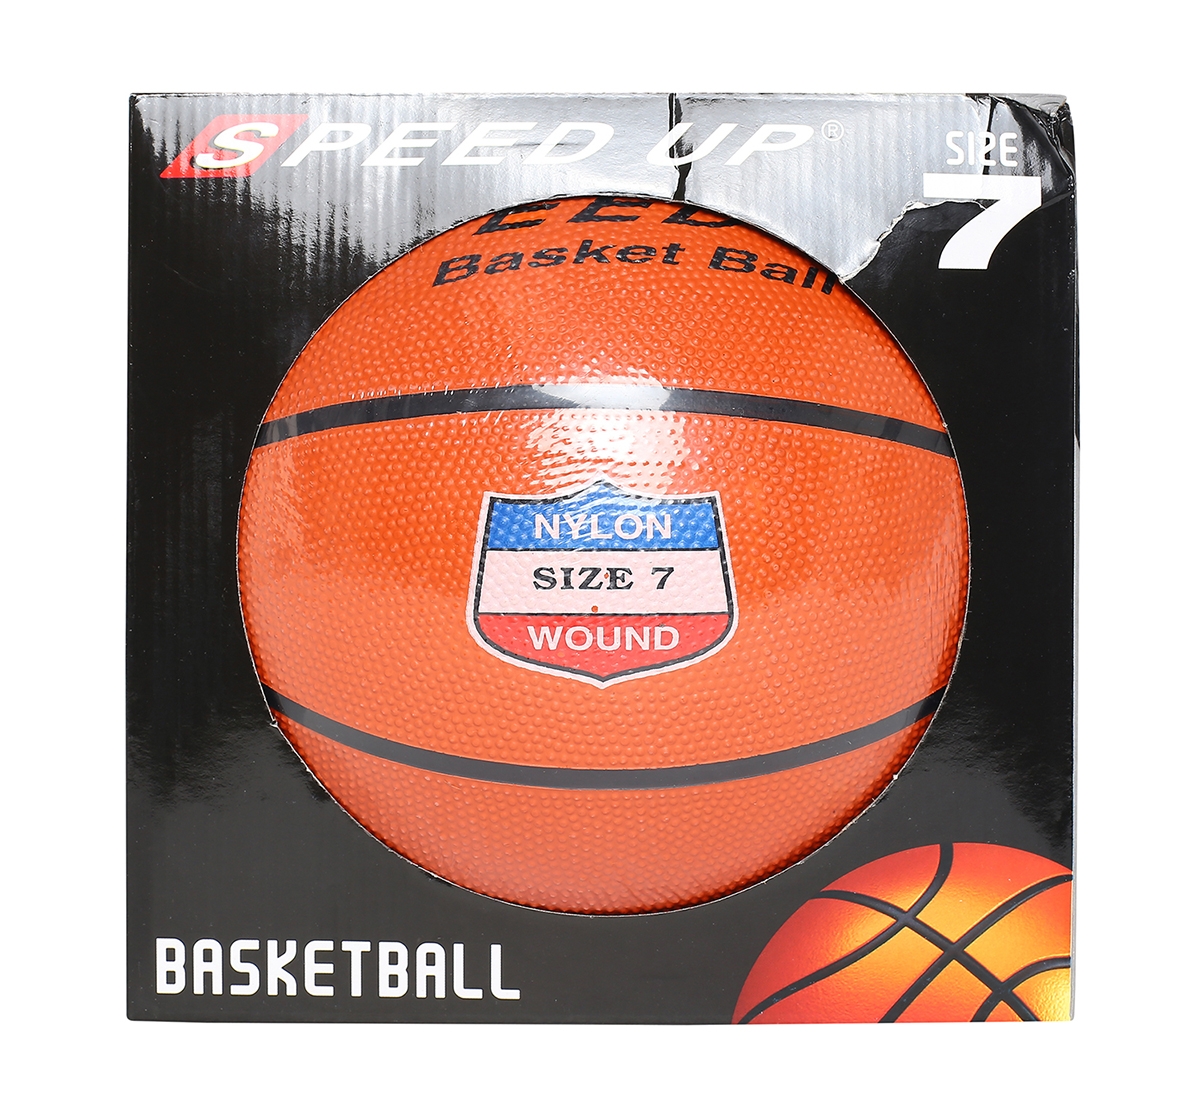 Speed Up | Speed Up Basketball Size 7 for Kids age 3Y+ (Orange)